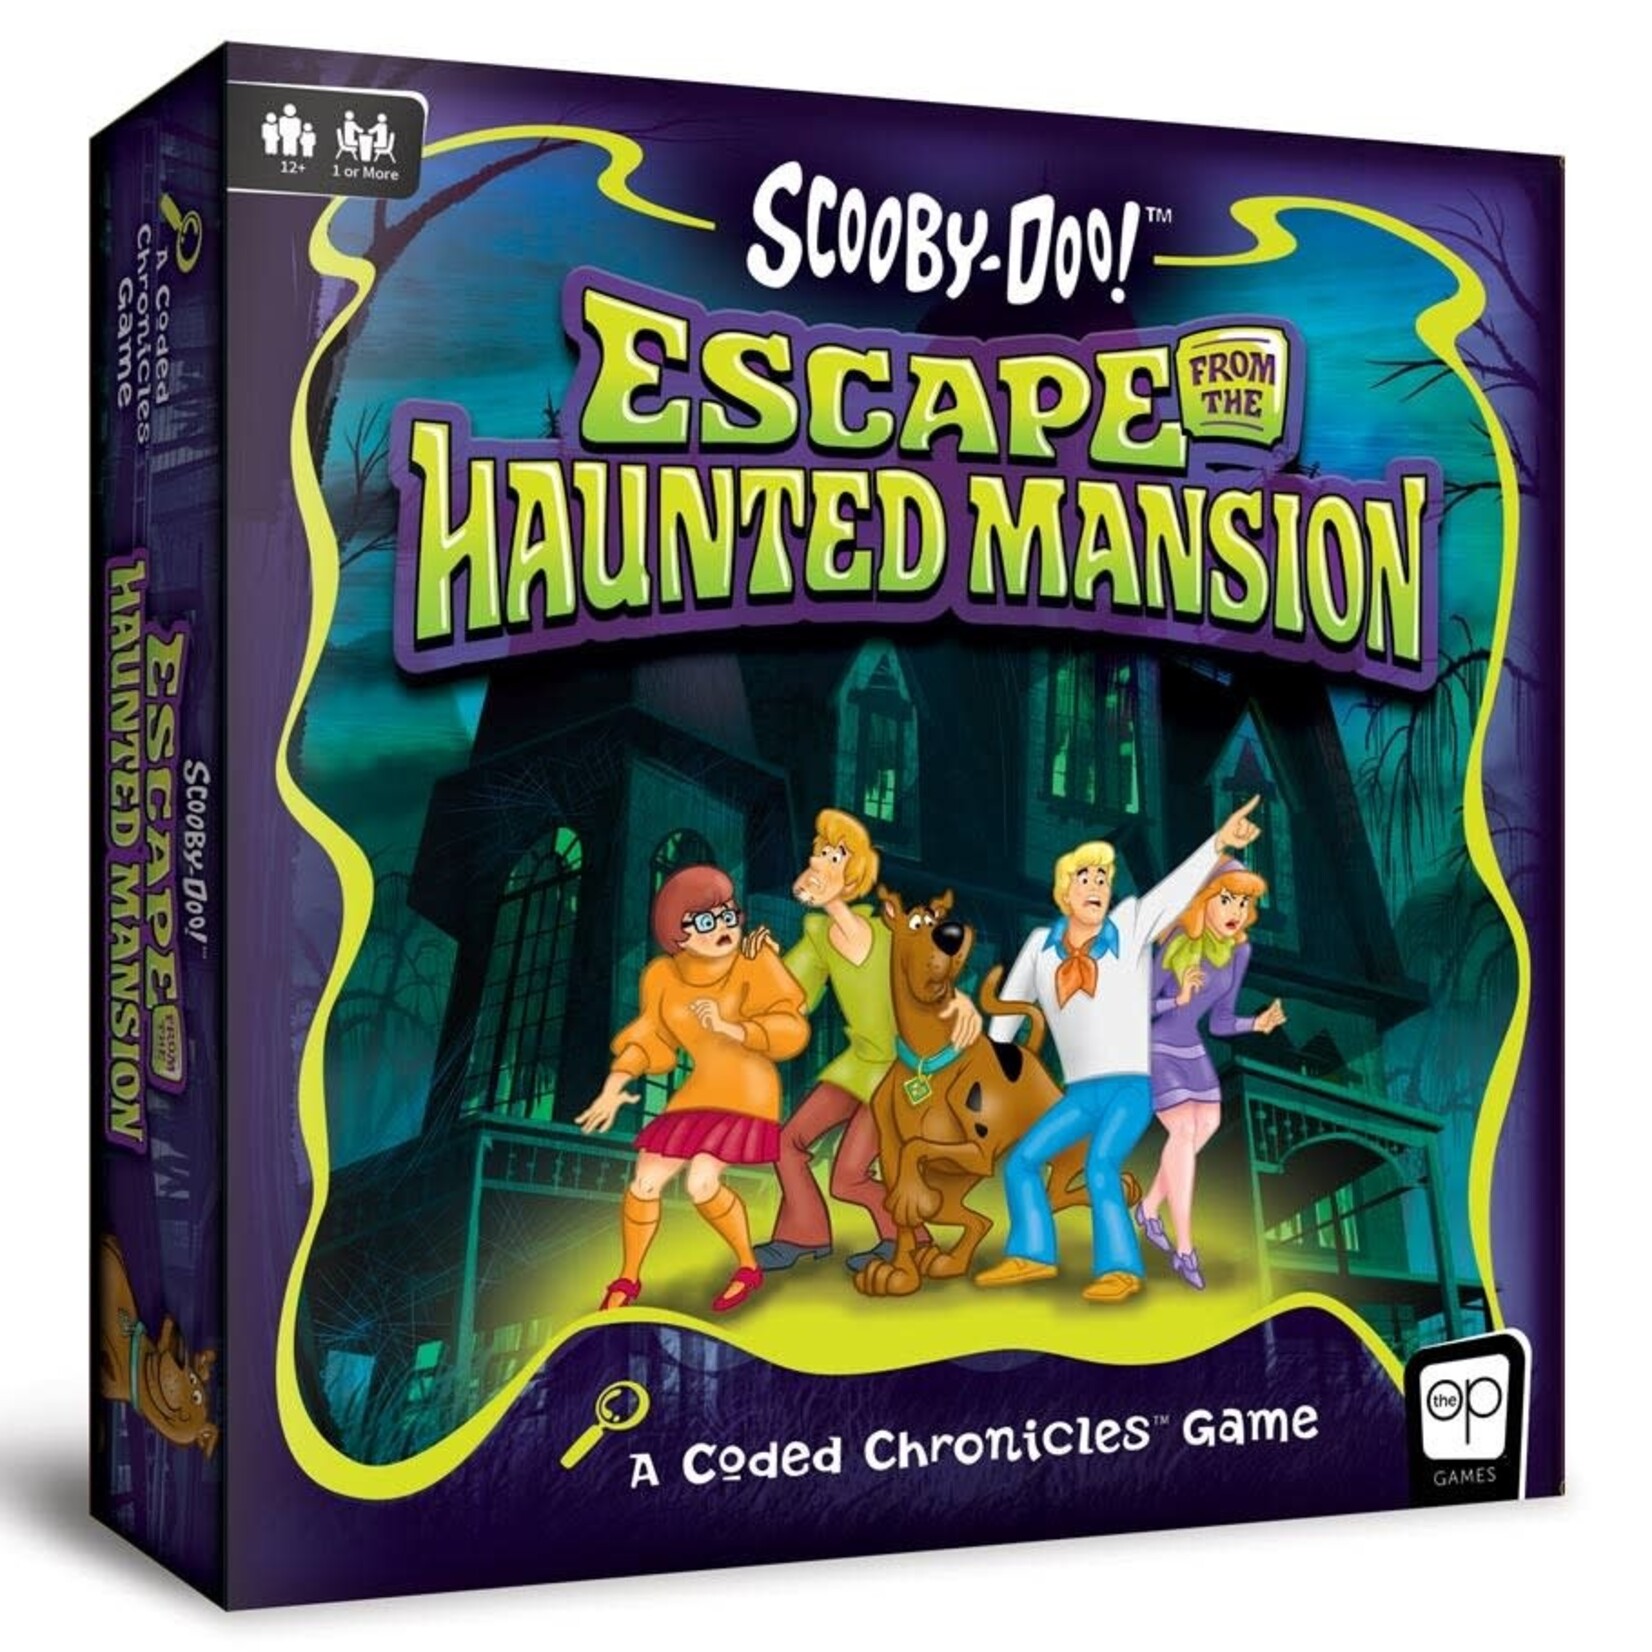 The OP-USAopoly Scooby-Doo! Escape from the Haunted Mansion